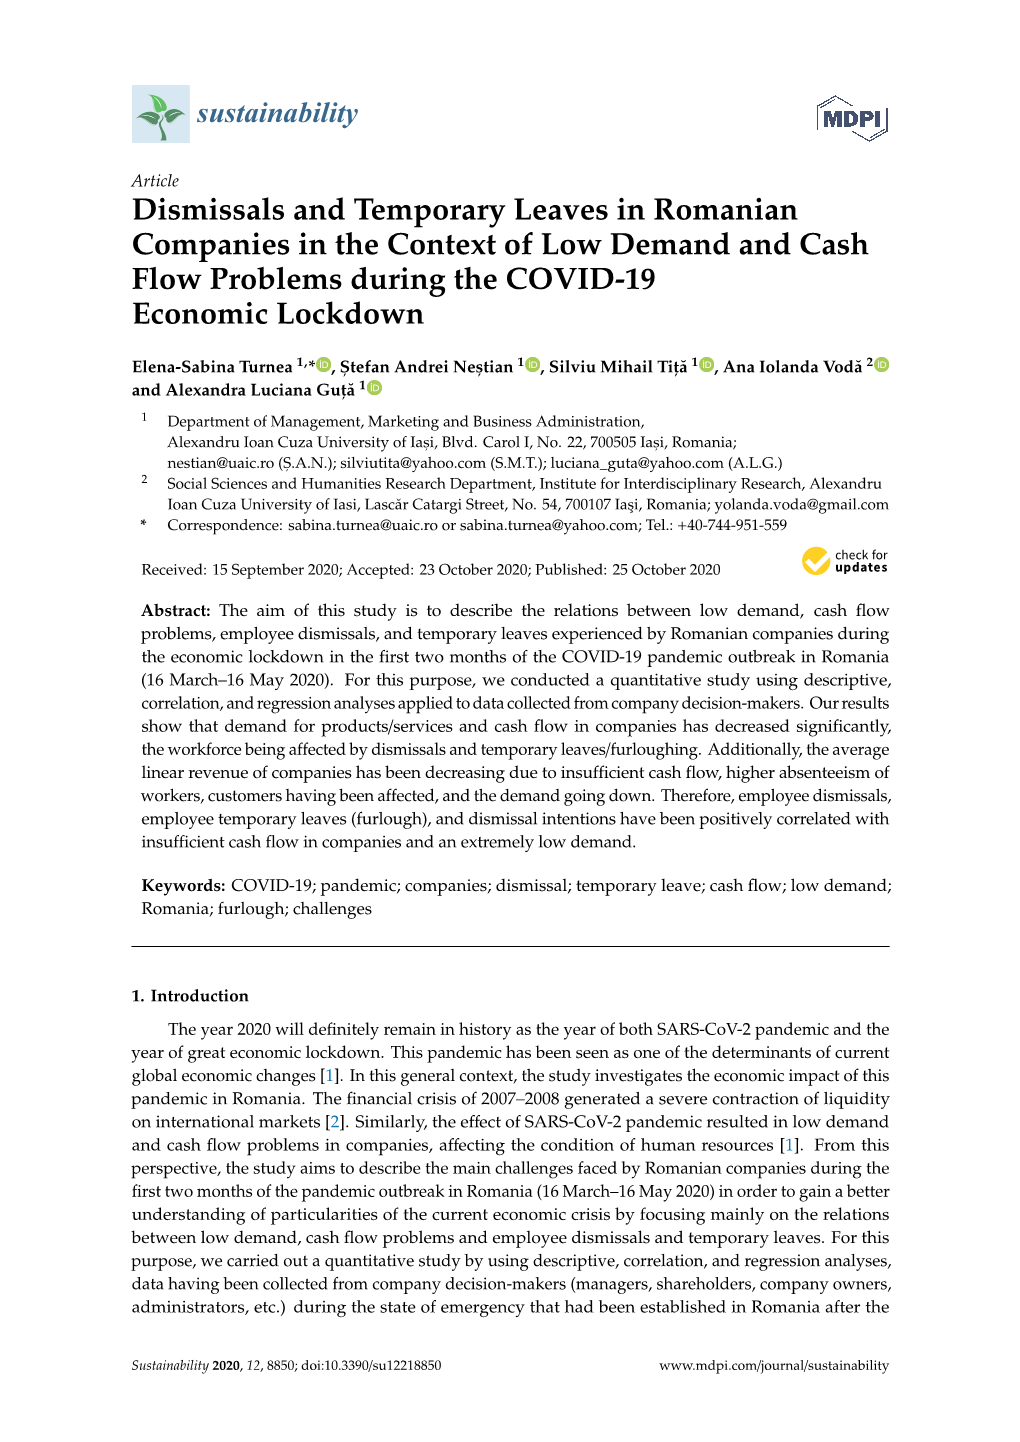 Dismissals and Temporary Leaves in Romanian Companies in the Context of Low Demand and Cash Flow Problems During the COVID-19 Economic Lockdown